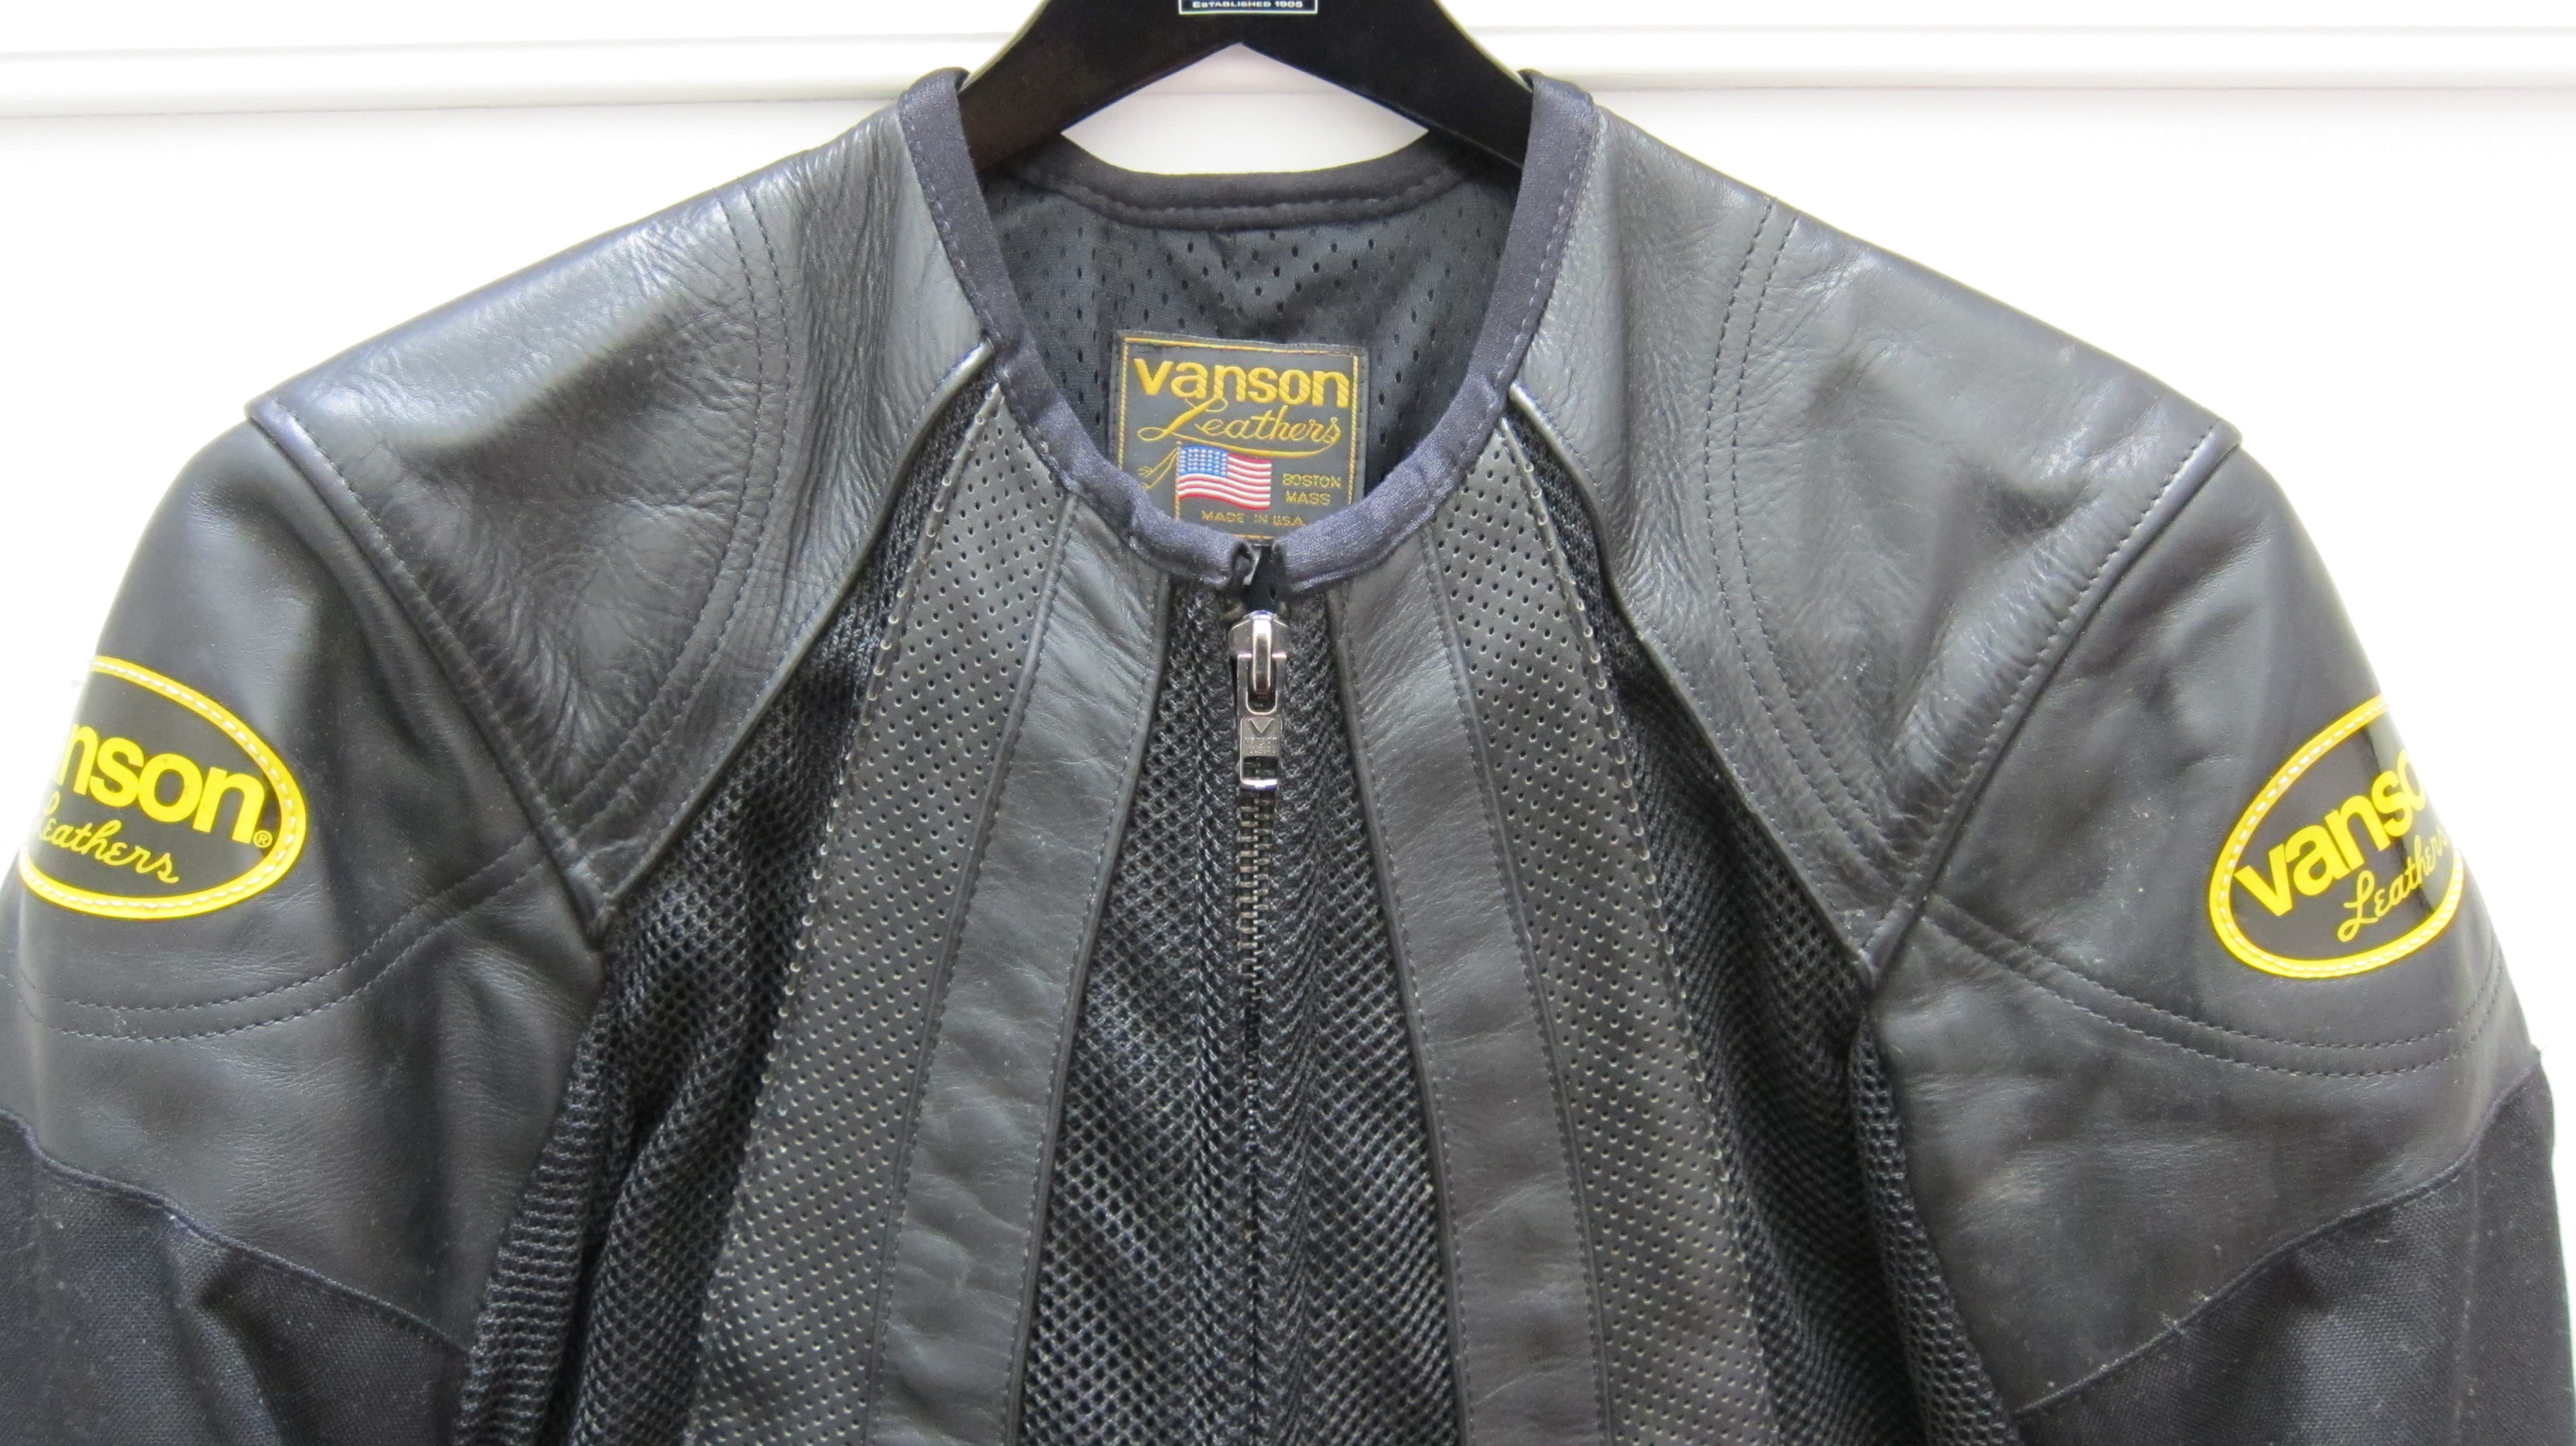 Viewing Images For Vanson Supermoto Jacket :: MotorcycleGear.com